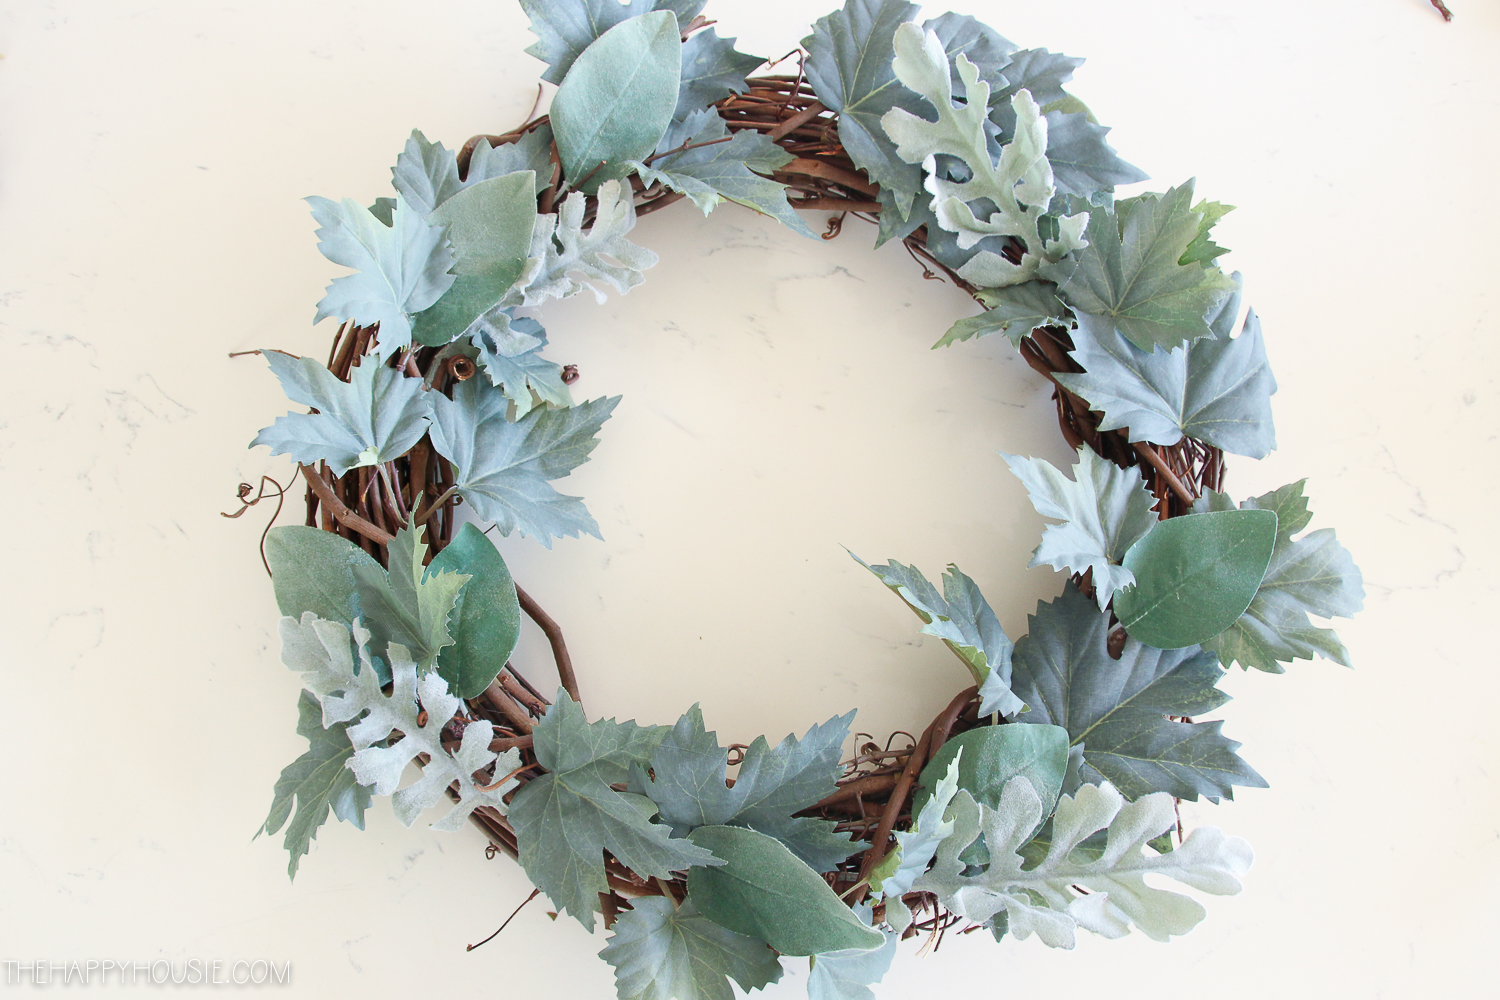 The maple leaves arranged on the grapevine wreath.